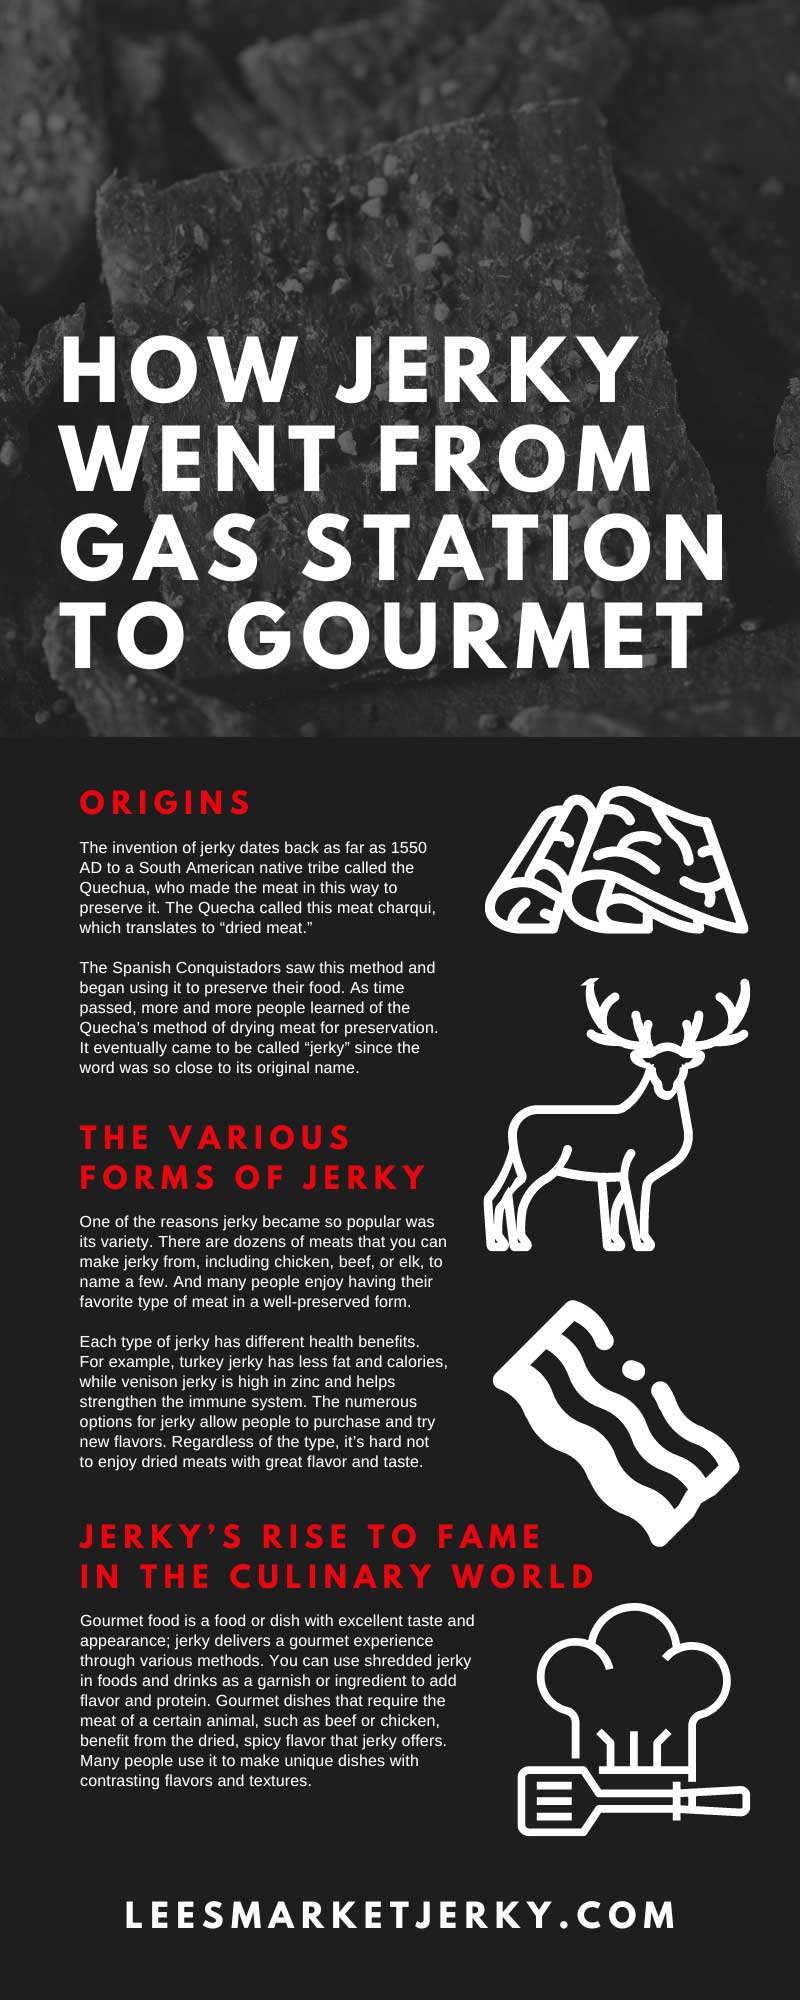 How Jerky Went From Gas Station to Gourmet